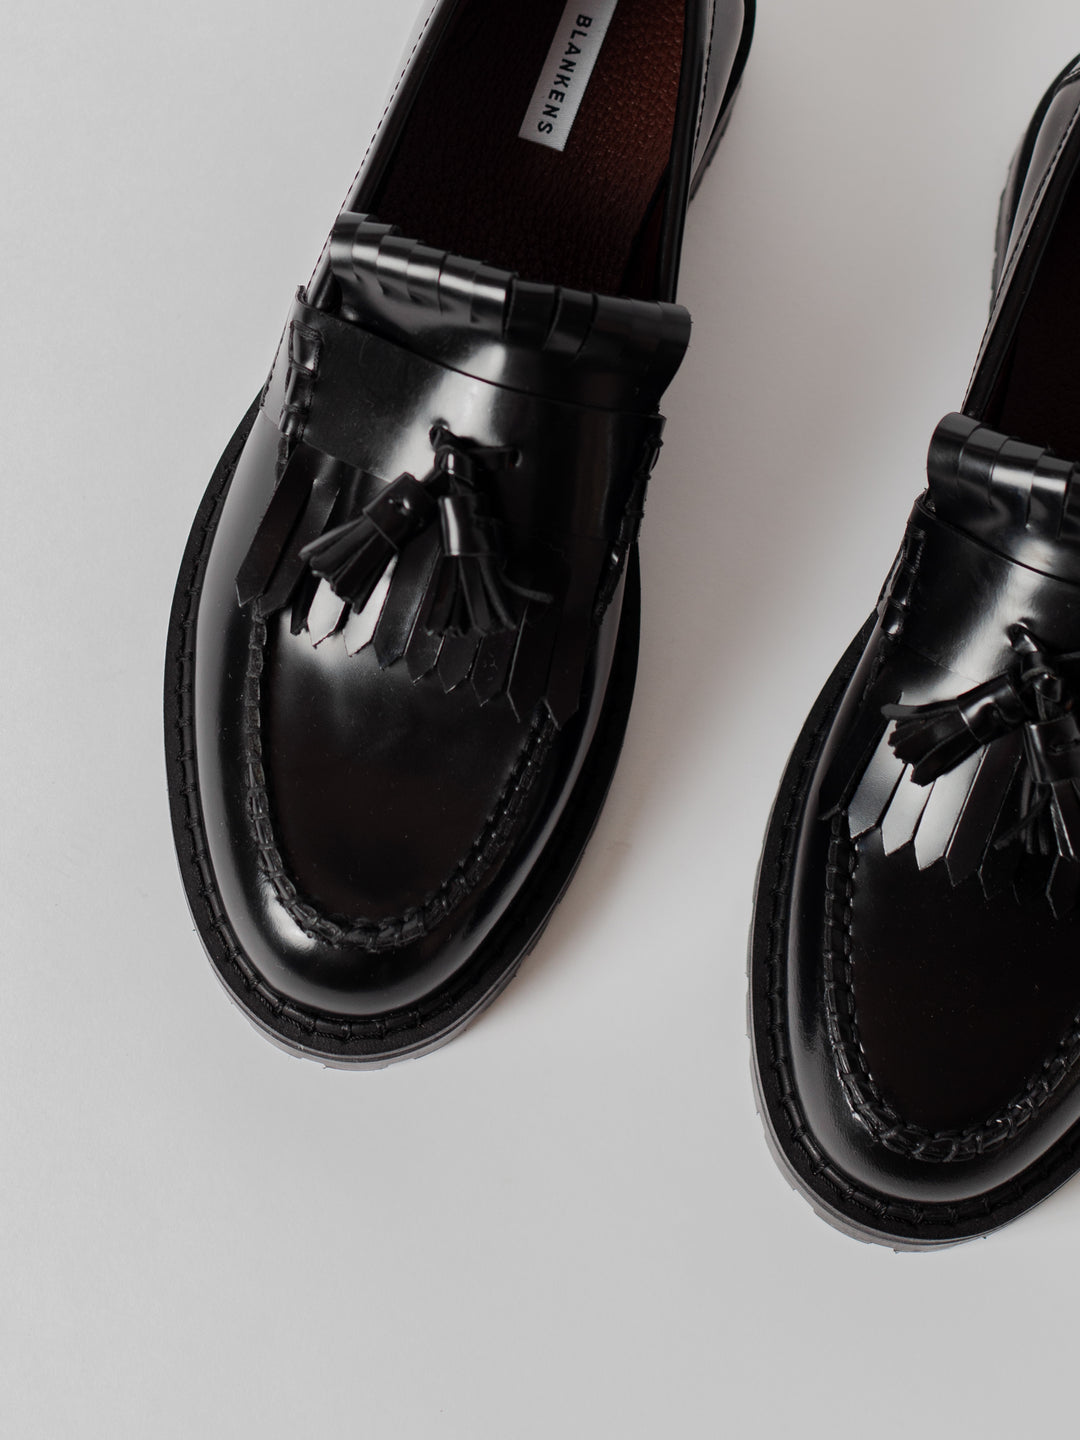 Blankens The Amal black loafer in leather with leather tassel in black detailed picture of the front and tassel. Blankens The Amal black loafer in leather with leather tassel in black. European leather sole in a rubber mix